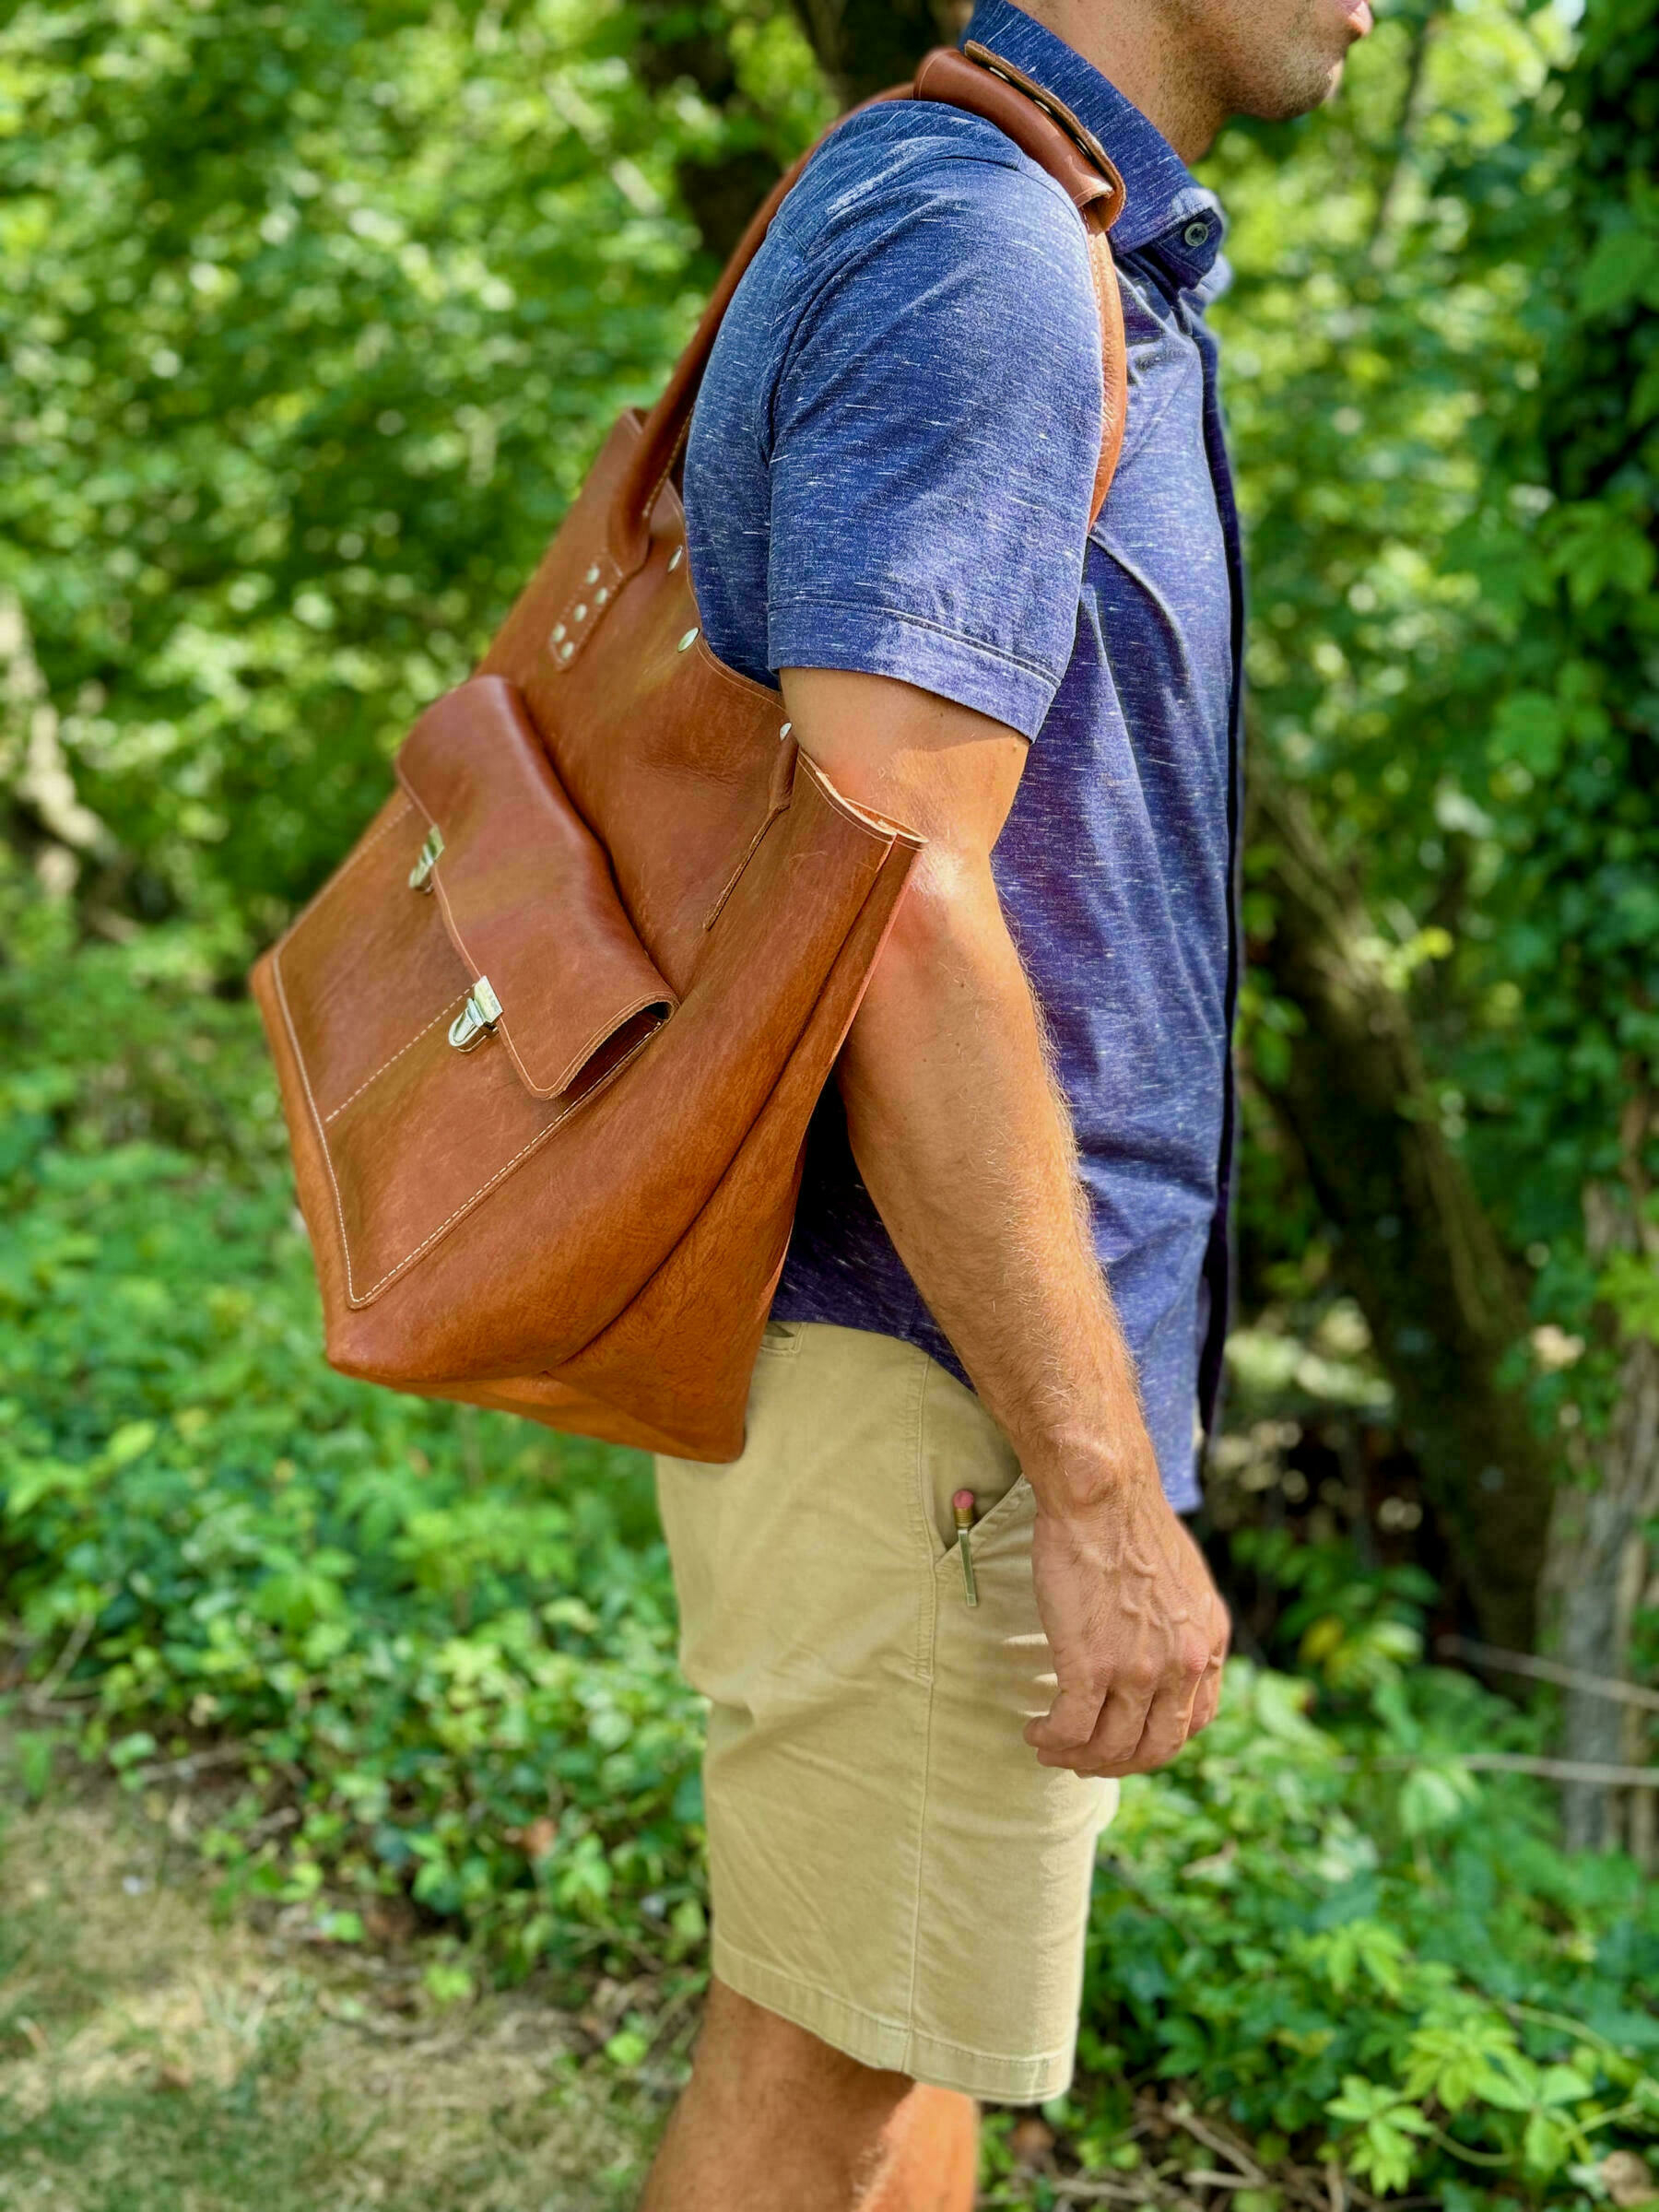 A man, wearing a blue shirt and beige shorts, carries a large brown leather bag over his shoulder in an outdoor setting.